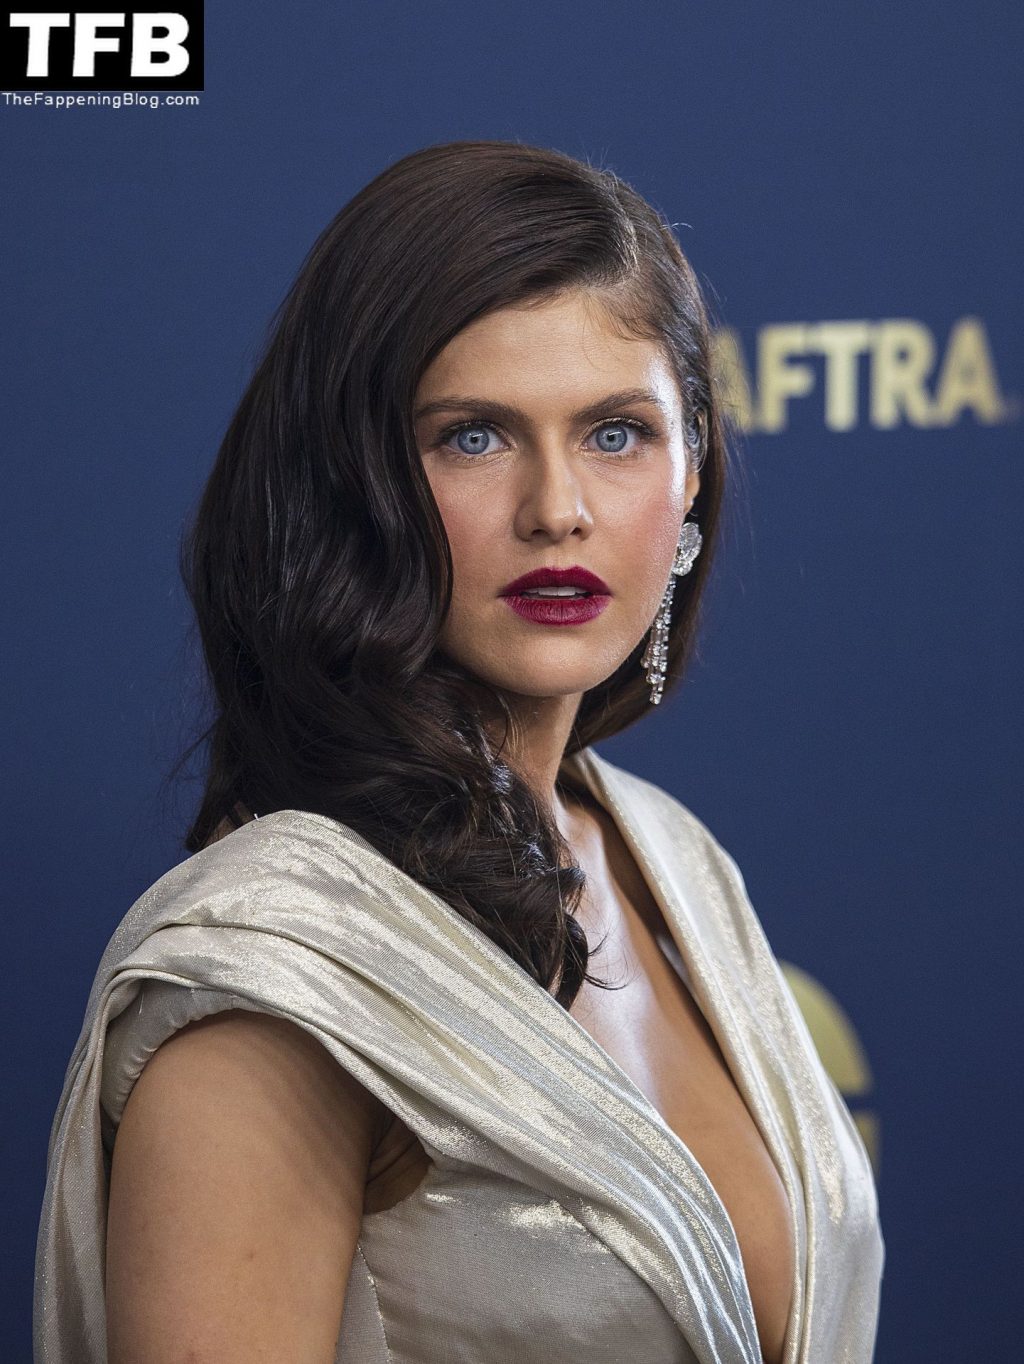 Alexandra Daddario Flaunts Her Famous Cleavage at the 28th Screen Actors Guild Awards (128 Photos)